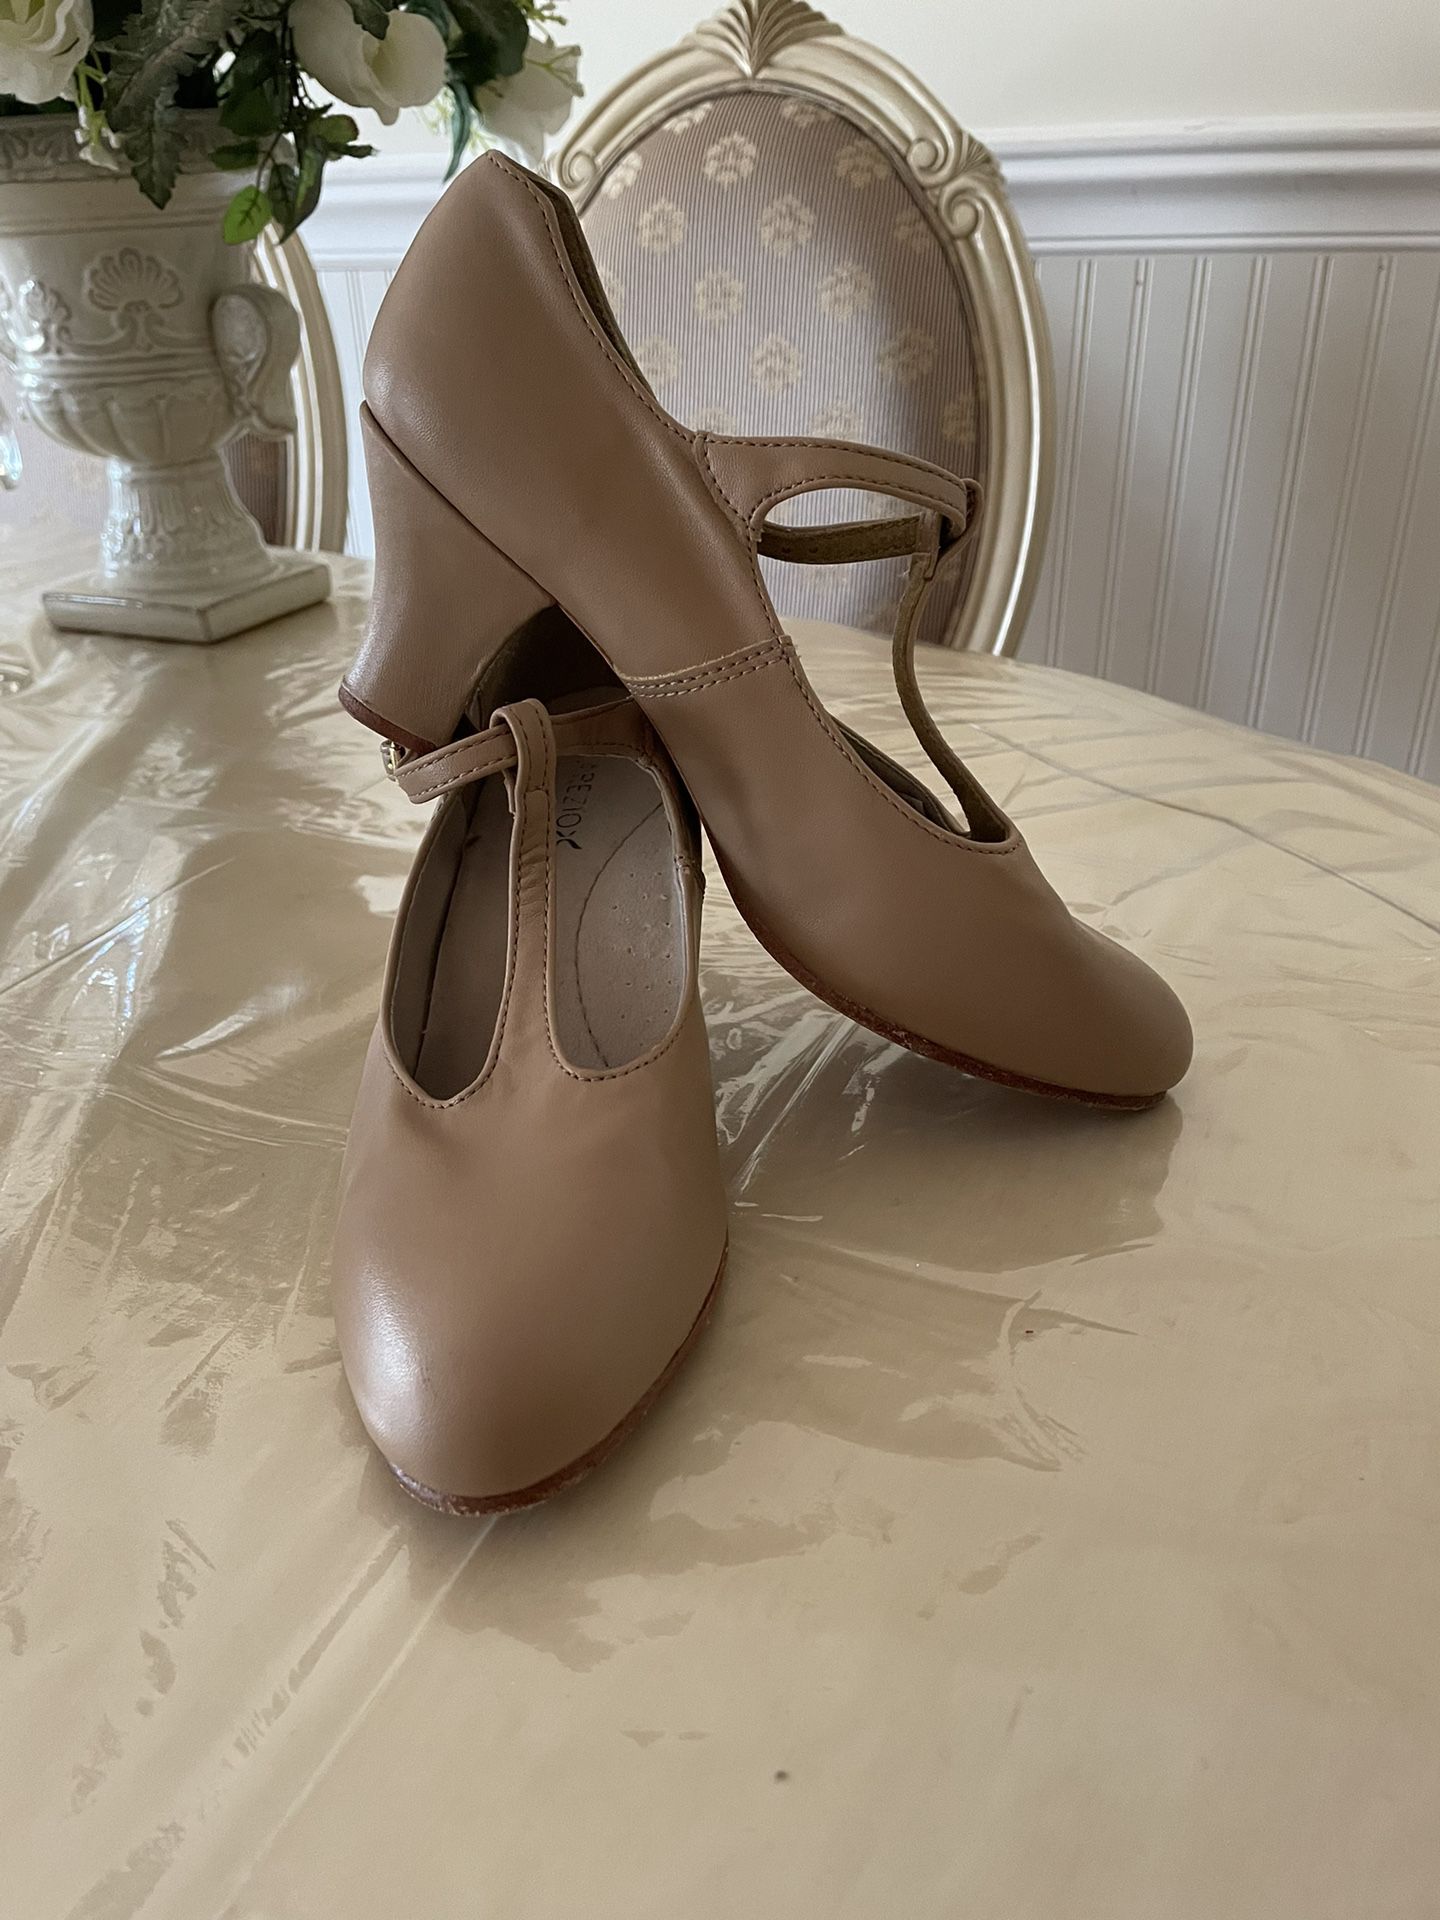 Women's leather shoes with heels. Size: 37.5